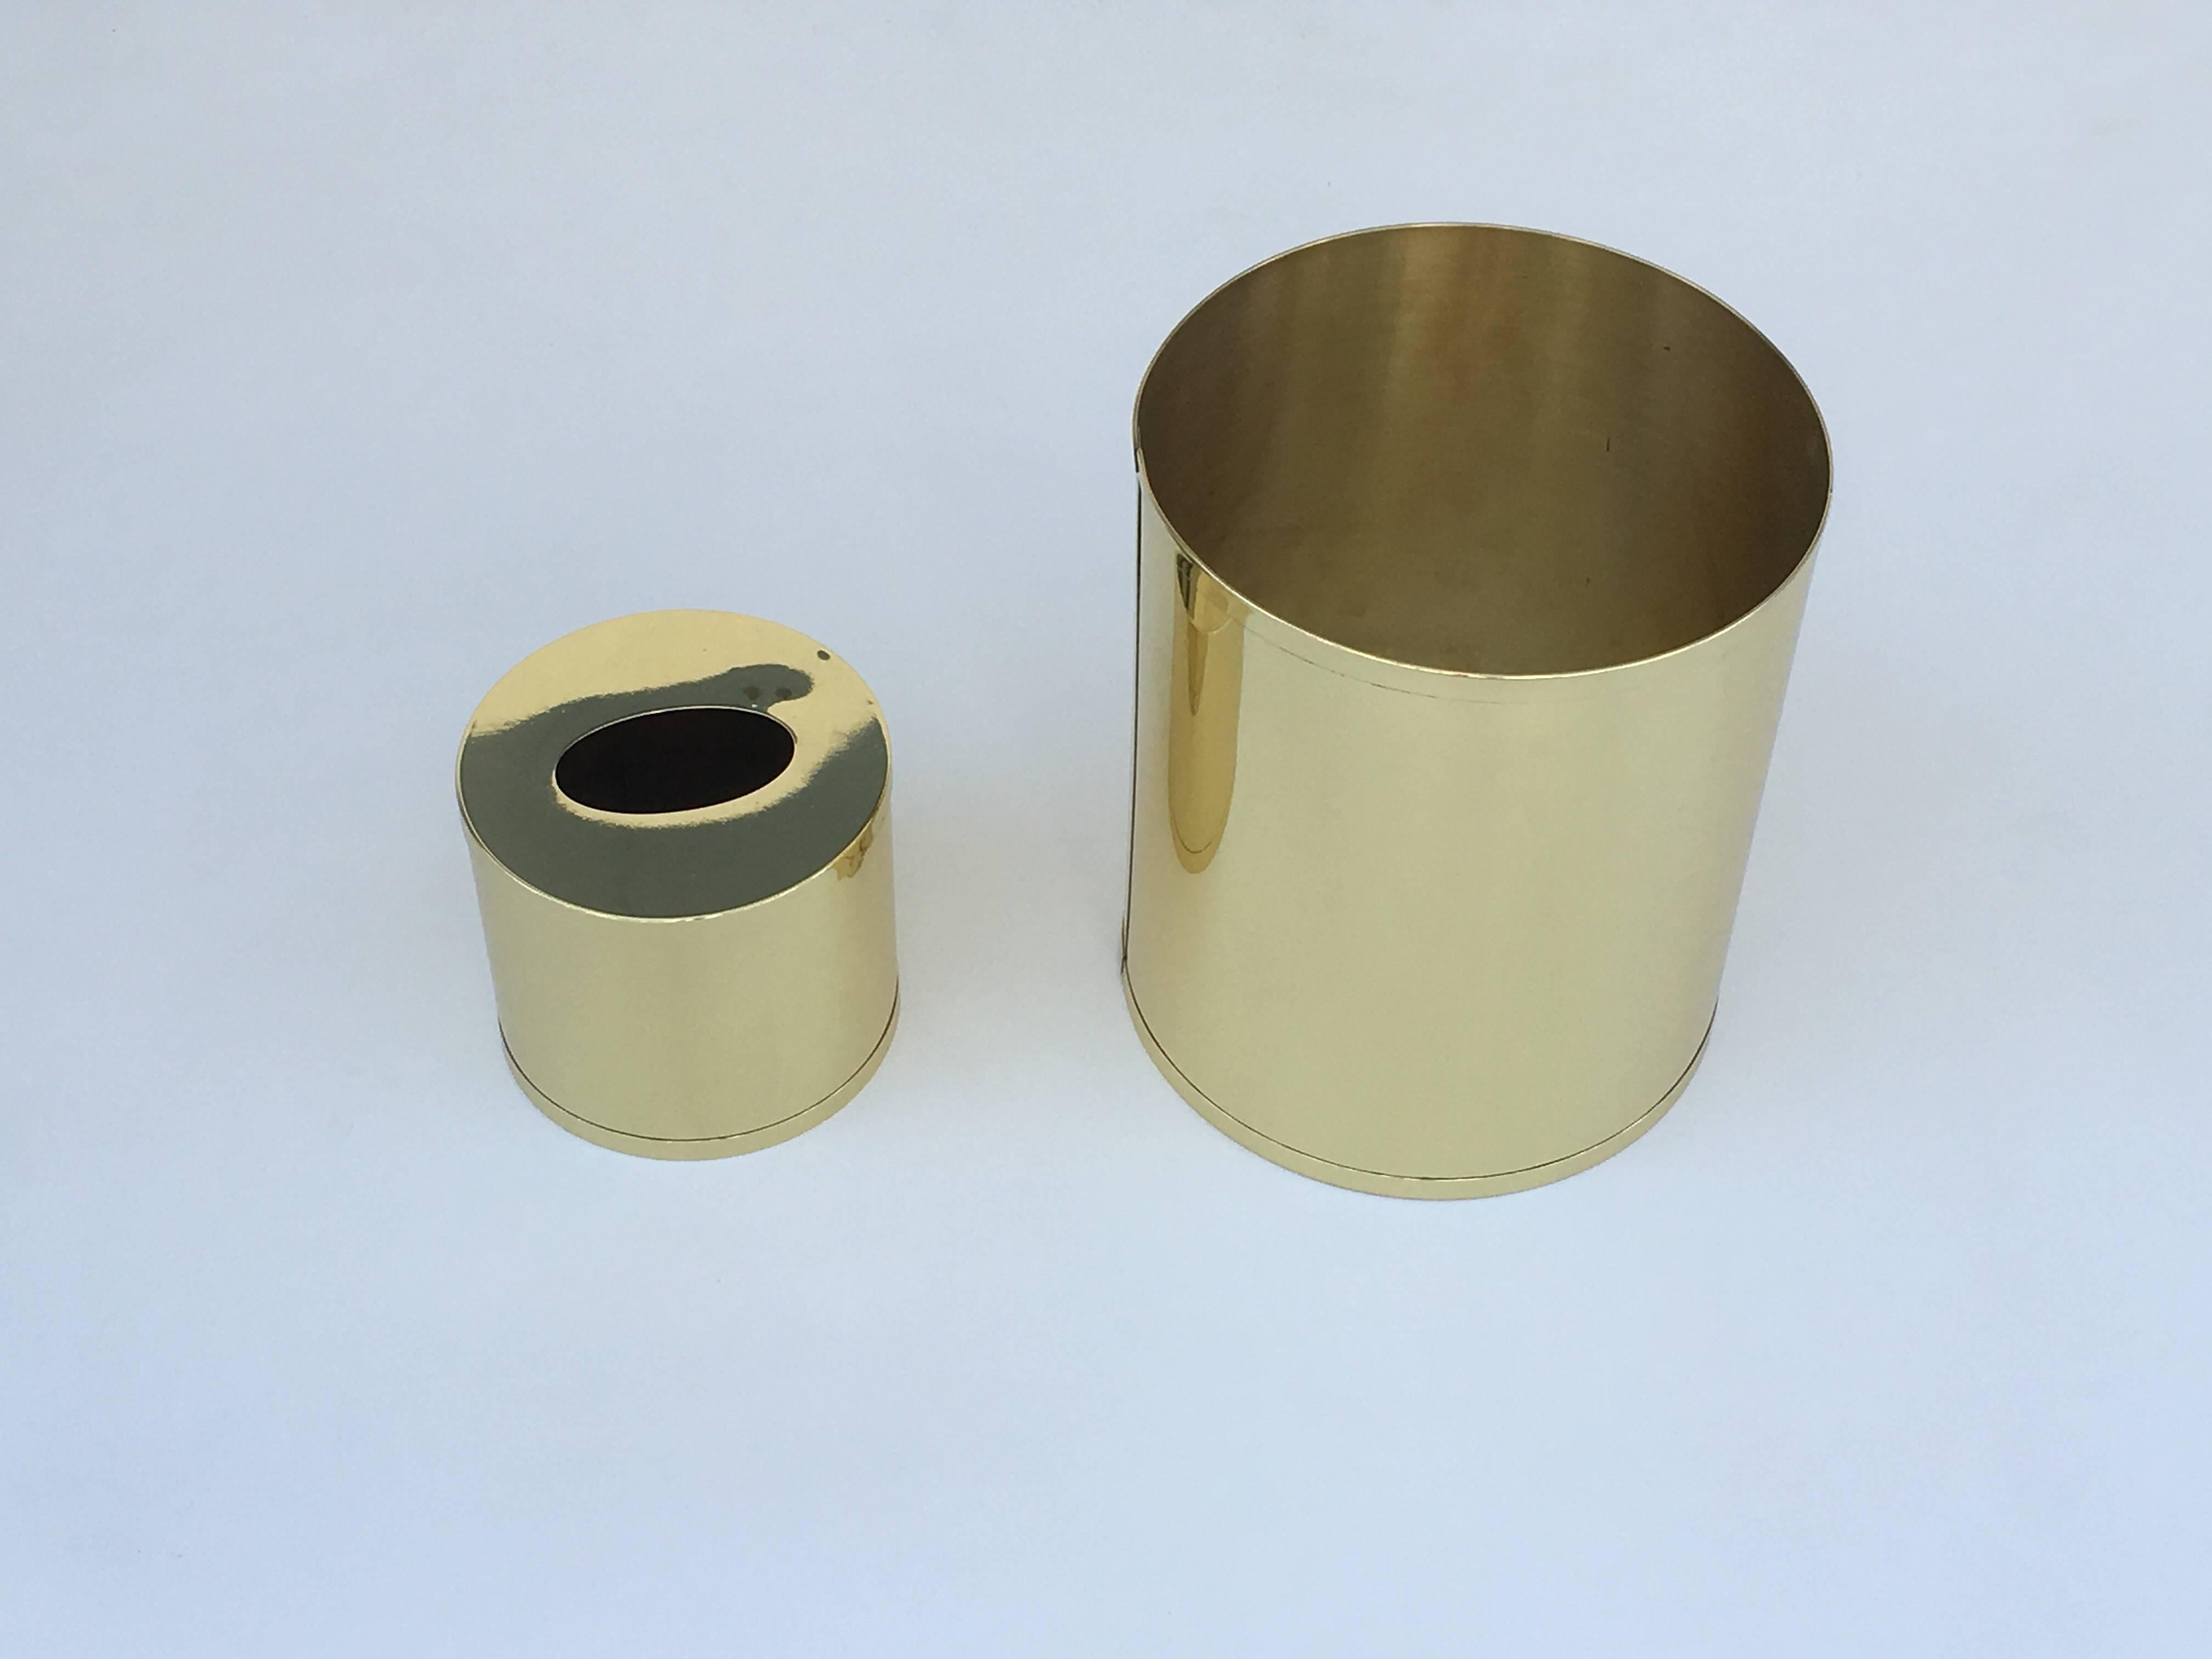 A glamorous set of polished brass waste basket and tissue box holder designed by Charles Hollis Jones in the 1970s. This were special order by clients. 

The waste basket is 11